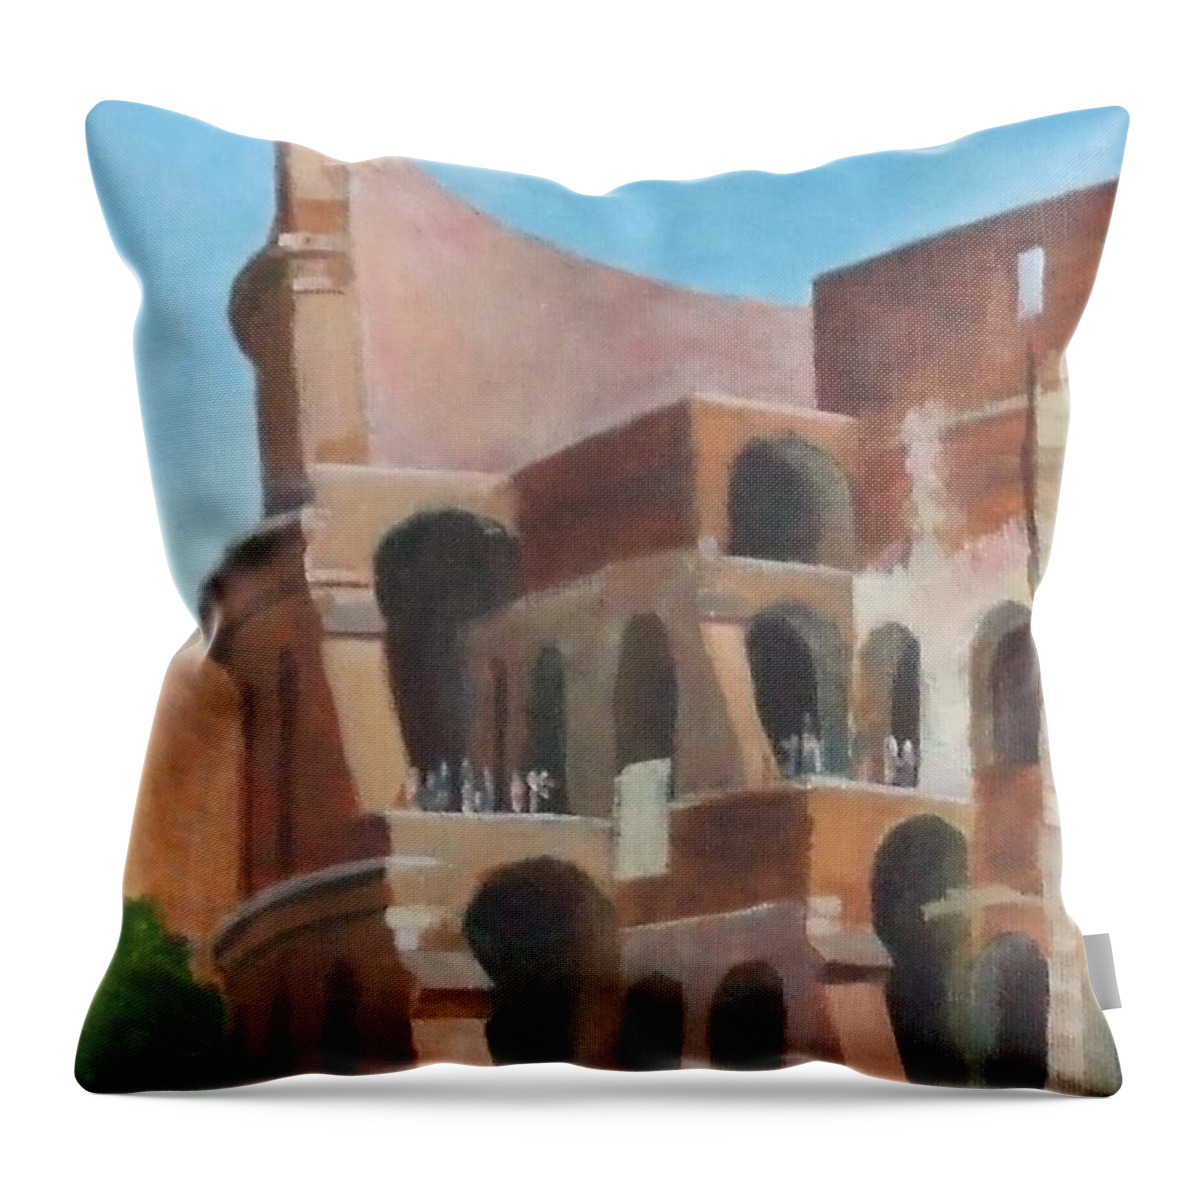 Coliseum Throw Pillow featuring the painting Coliseum by Claire Gagnon